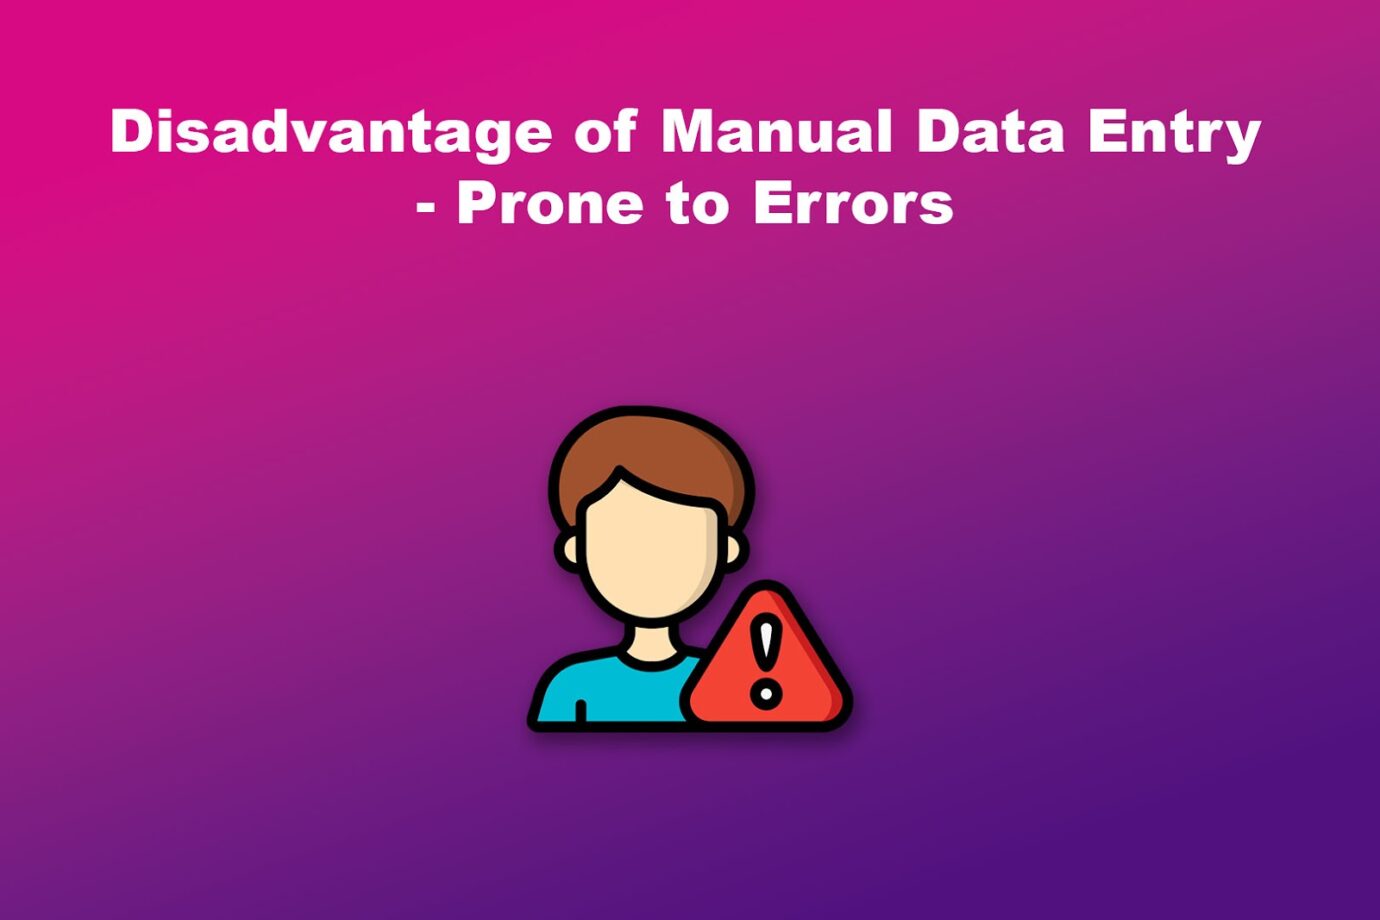 Disadvantage of Manual Data Entry - Prone to Errors